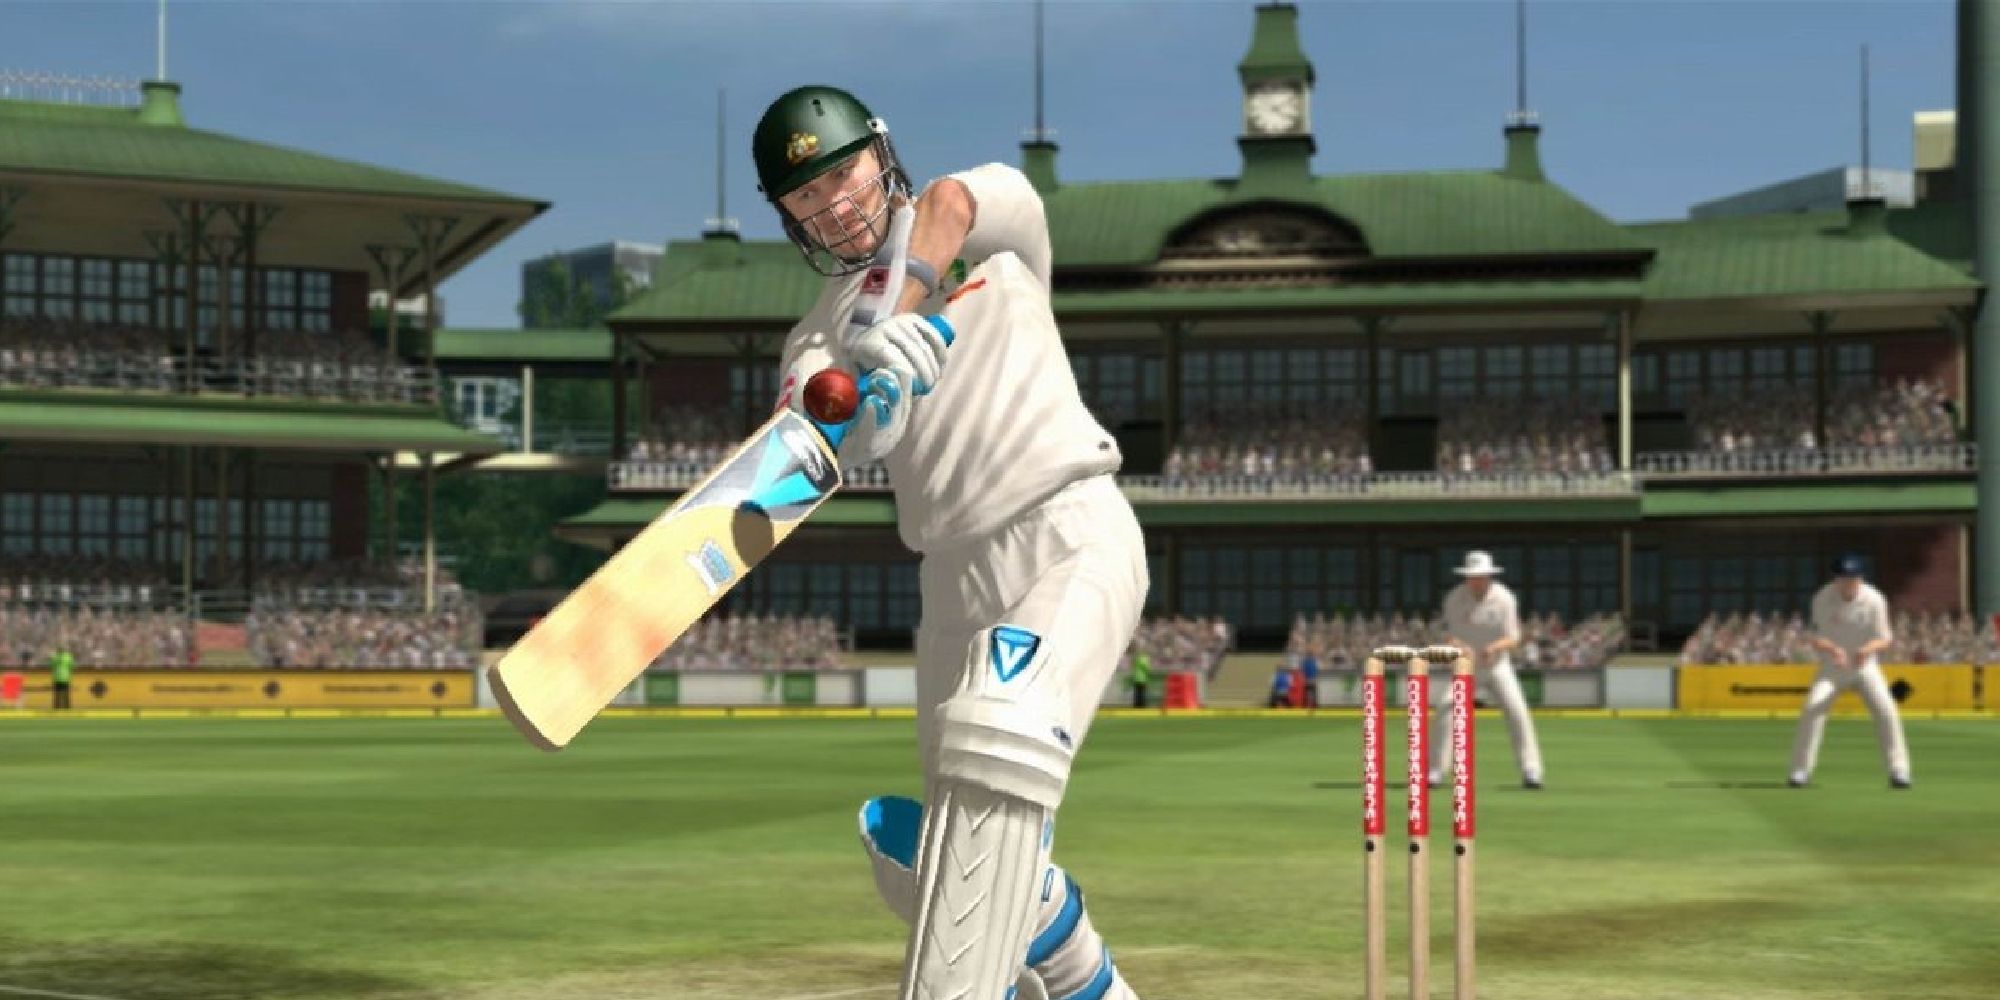 A cricket player hits a ball in Ashes Cricket 2009